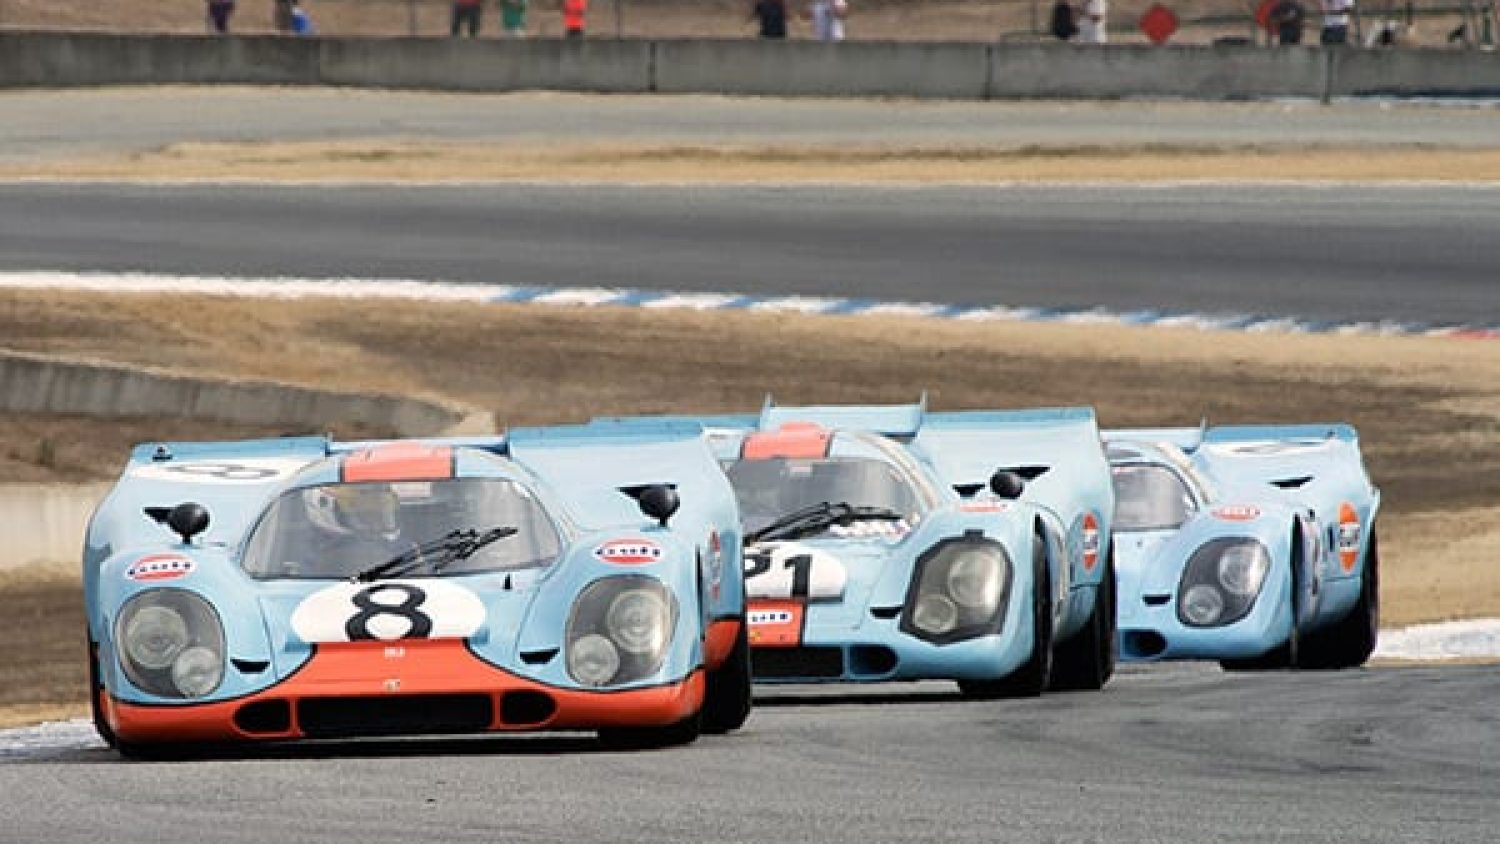 Dennis Gray got three shots of these Porsche 917s driven by Charles Nearburg, Chris MacAllister, and Bruce Canepa; no one else got the shot. Photo © Dennis Gray.